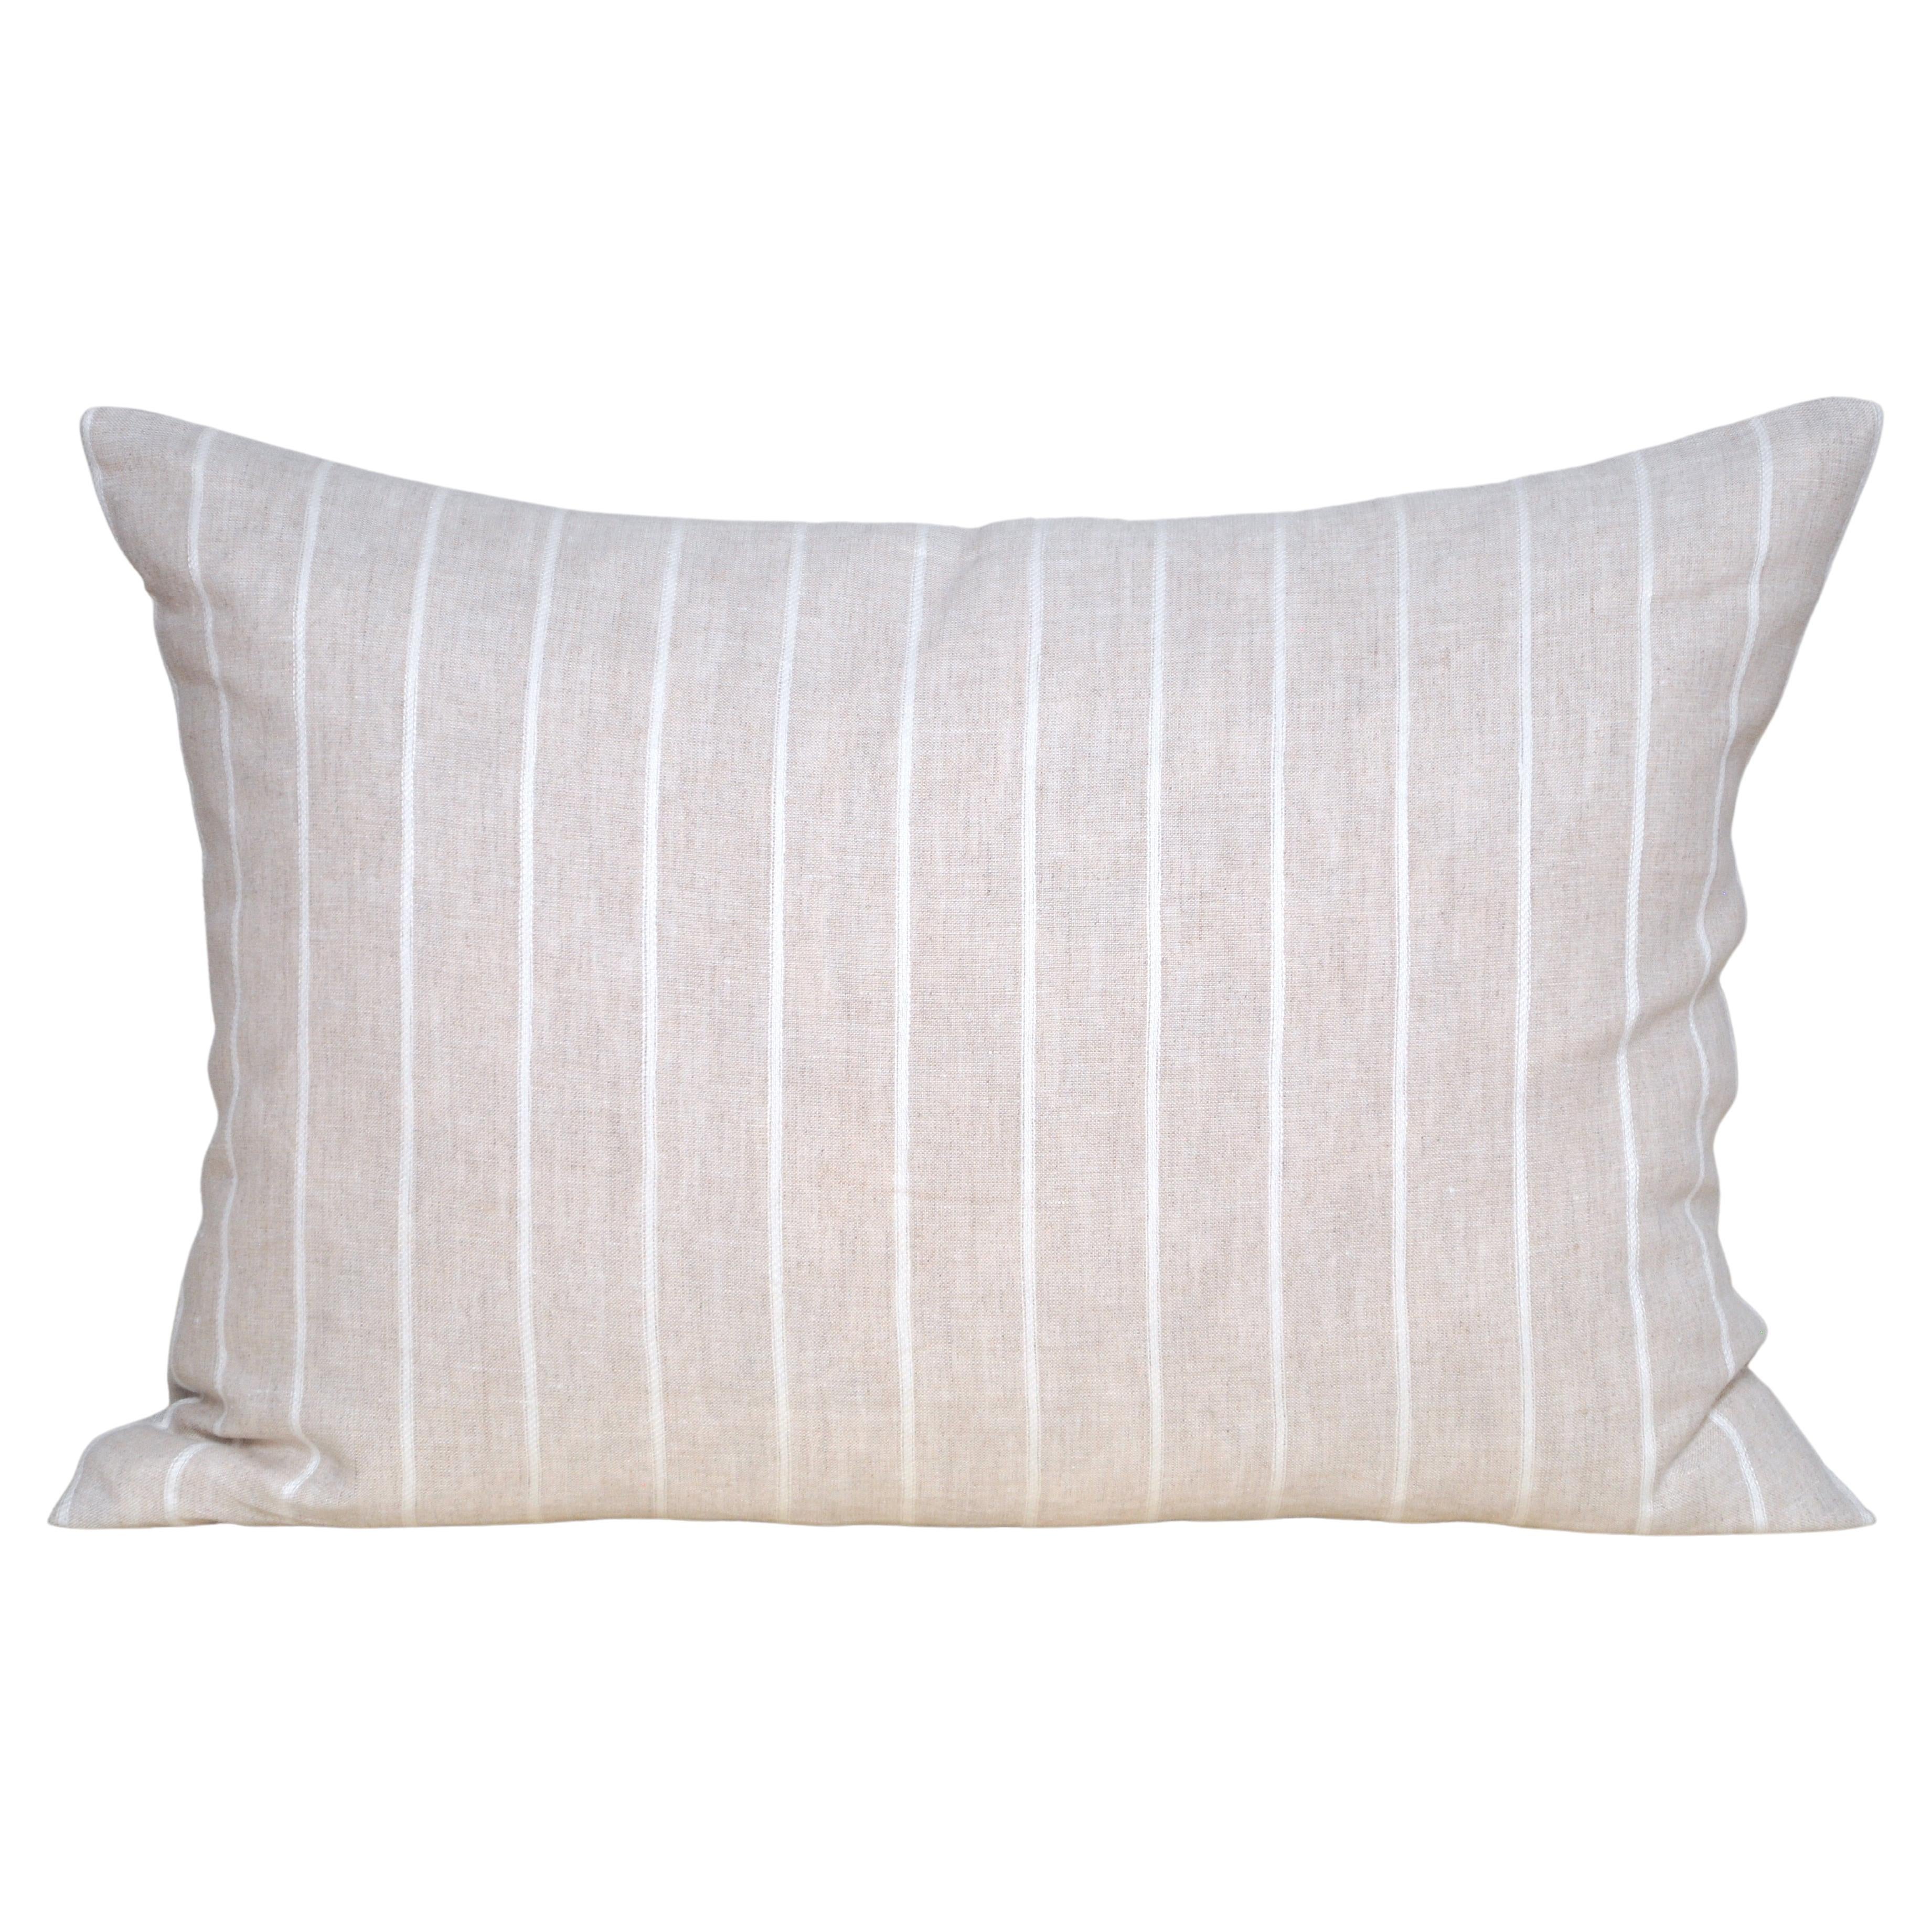 Luxury Vintage Irish Linen Pillow by Katie Larmour Couture Cushions Beige White For Sale